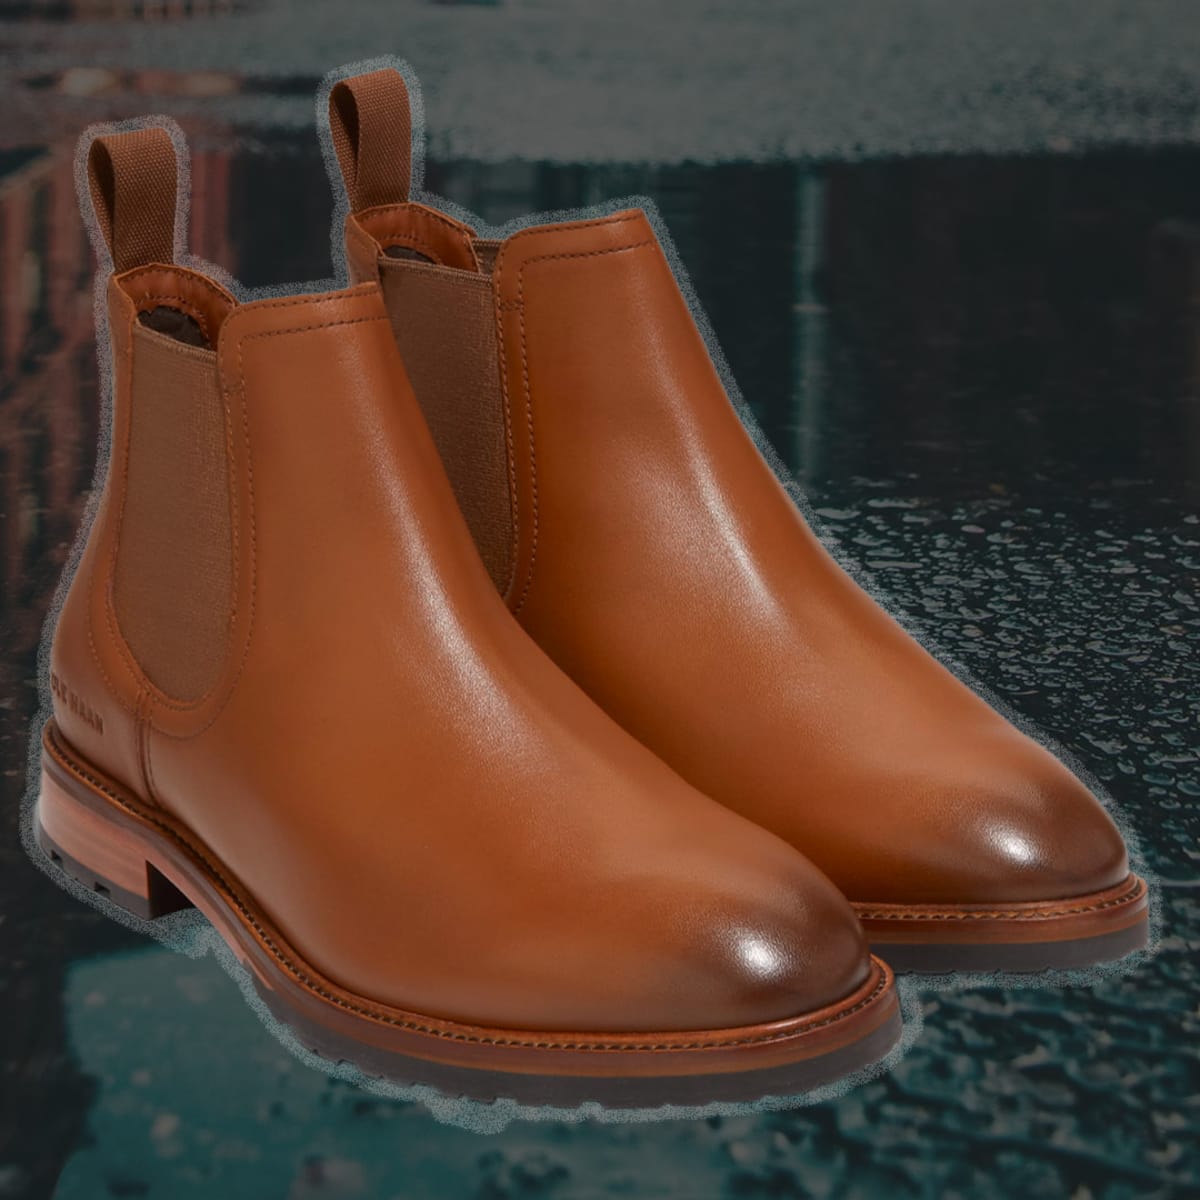 These Four Cole Haan Waterproof Boots Are Now Up to 70% Off - Men's Journal